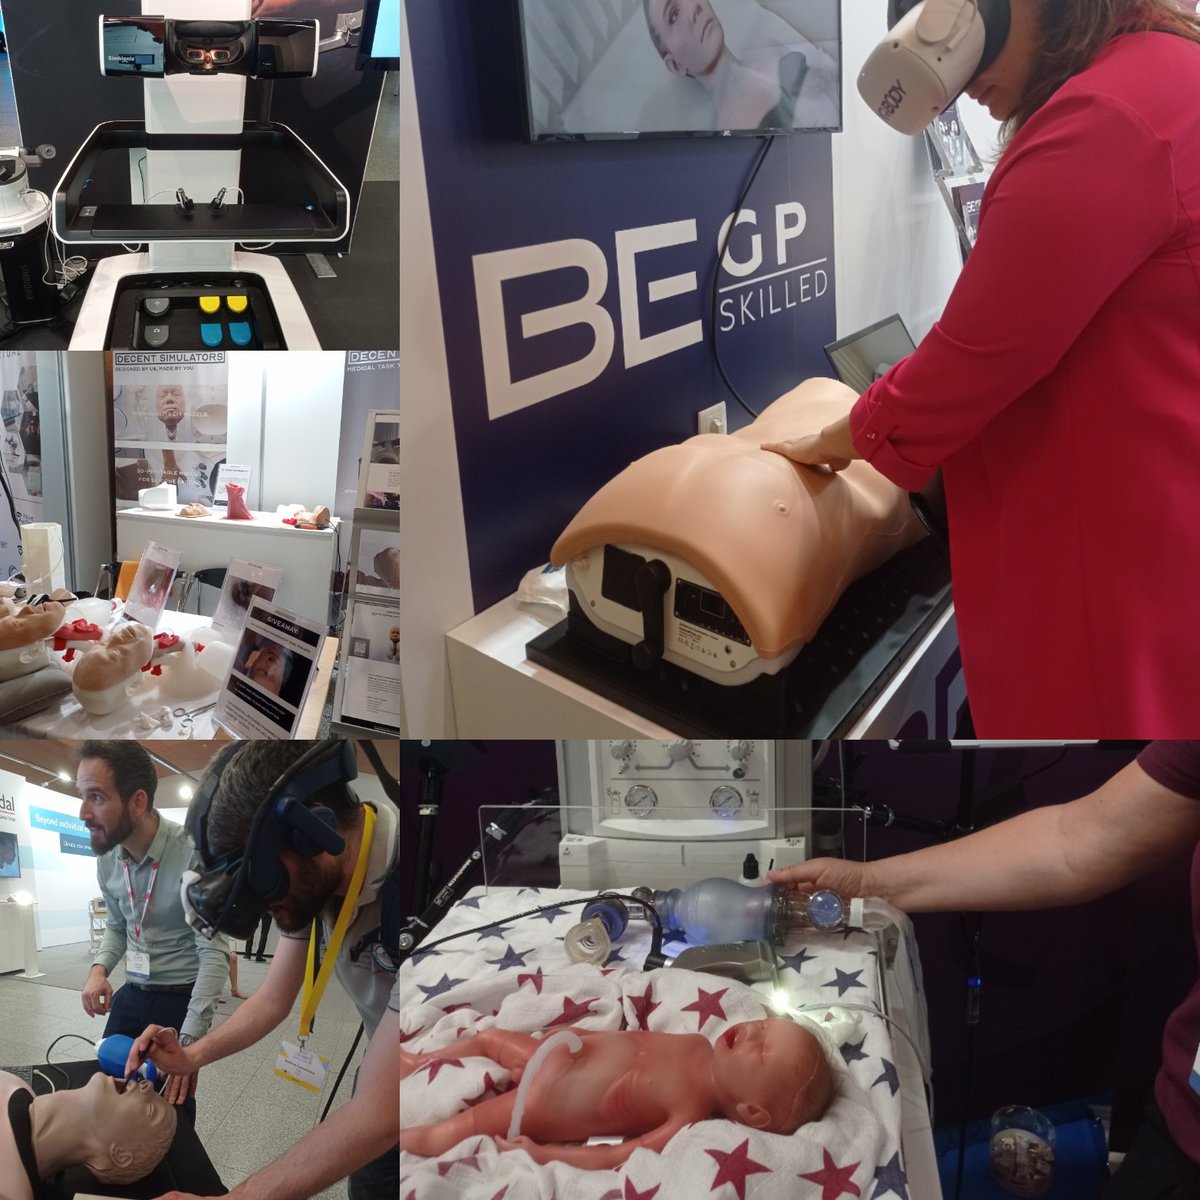 Memories from #day3 of #sesam2023, a day we dedicated to explore the #exhibitionHall!
@SurgicalScience @decentsim @SIMCharacters #BeGpSkilled #Laparo #healthcareSimulation #medicalTraining #medicalSimulation #medicalEducation #technology